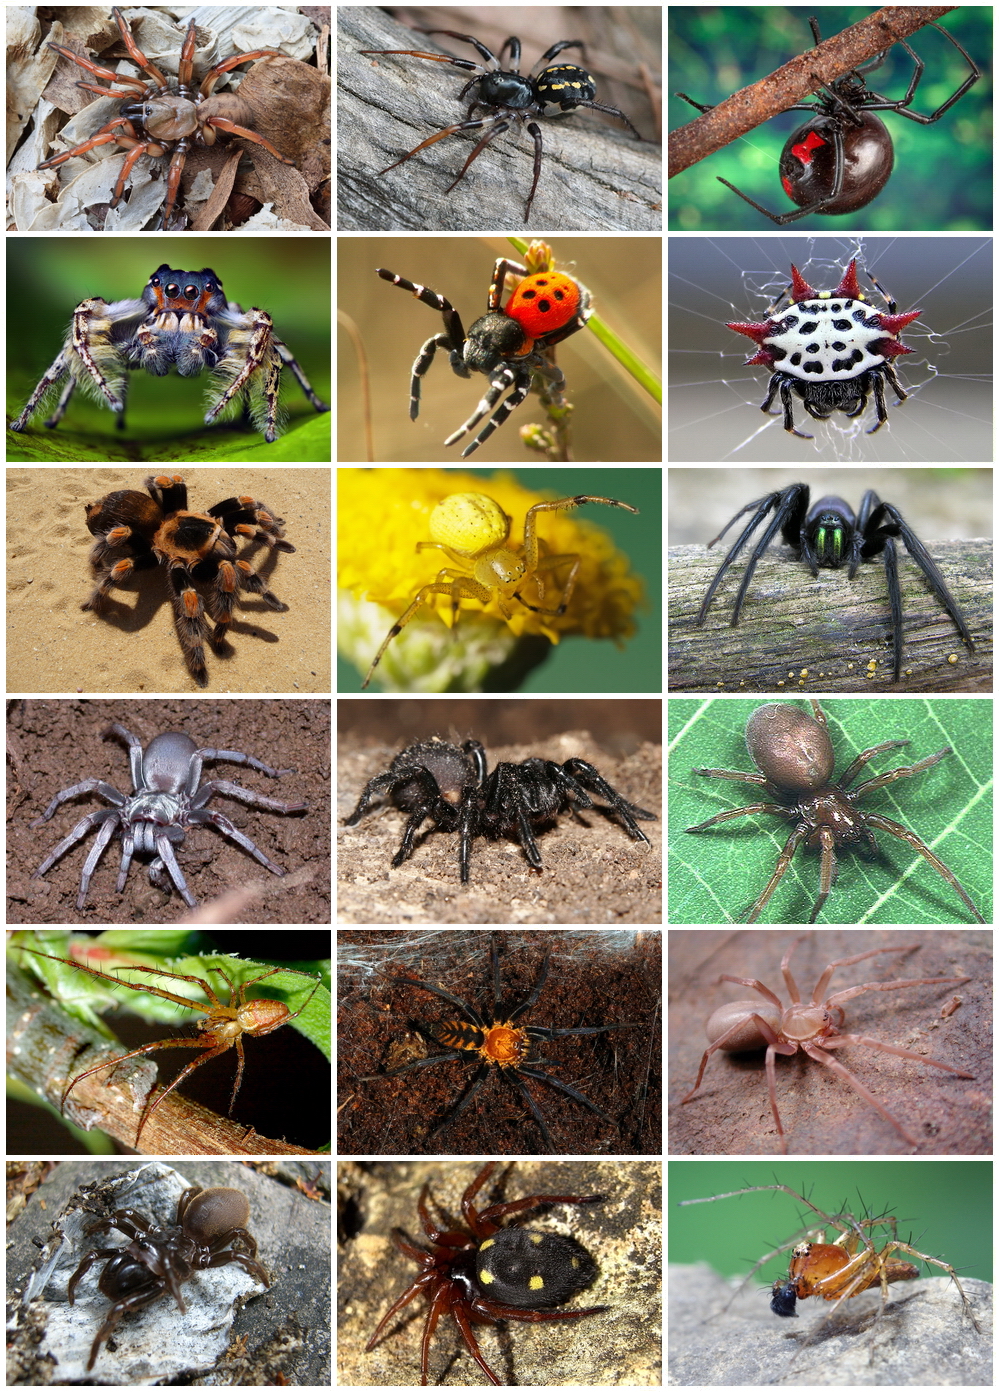 Spiders (System of a Down song) - Wikipedia